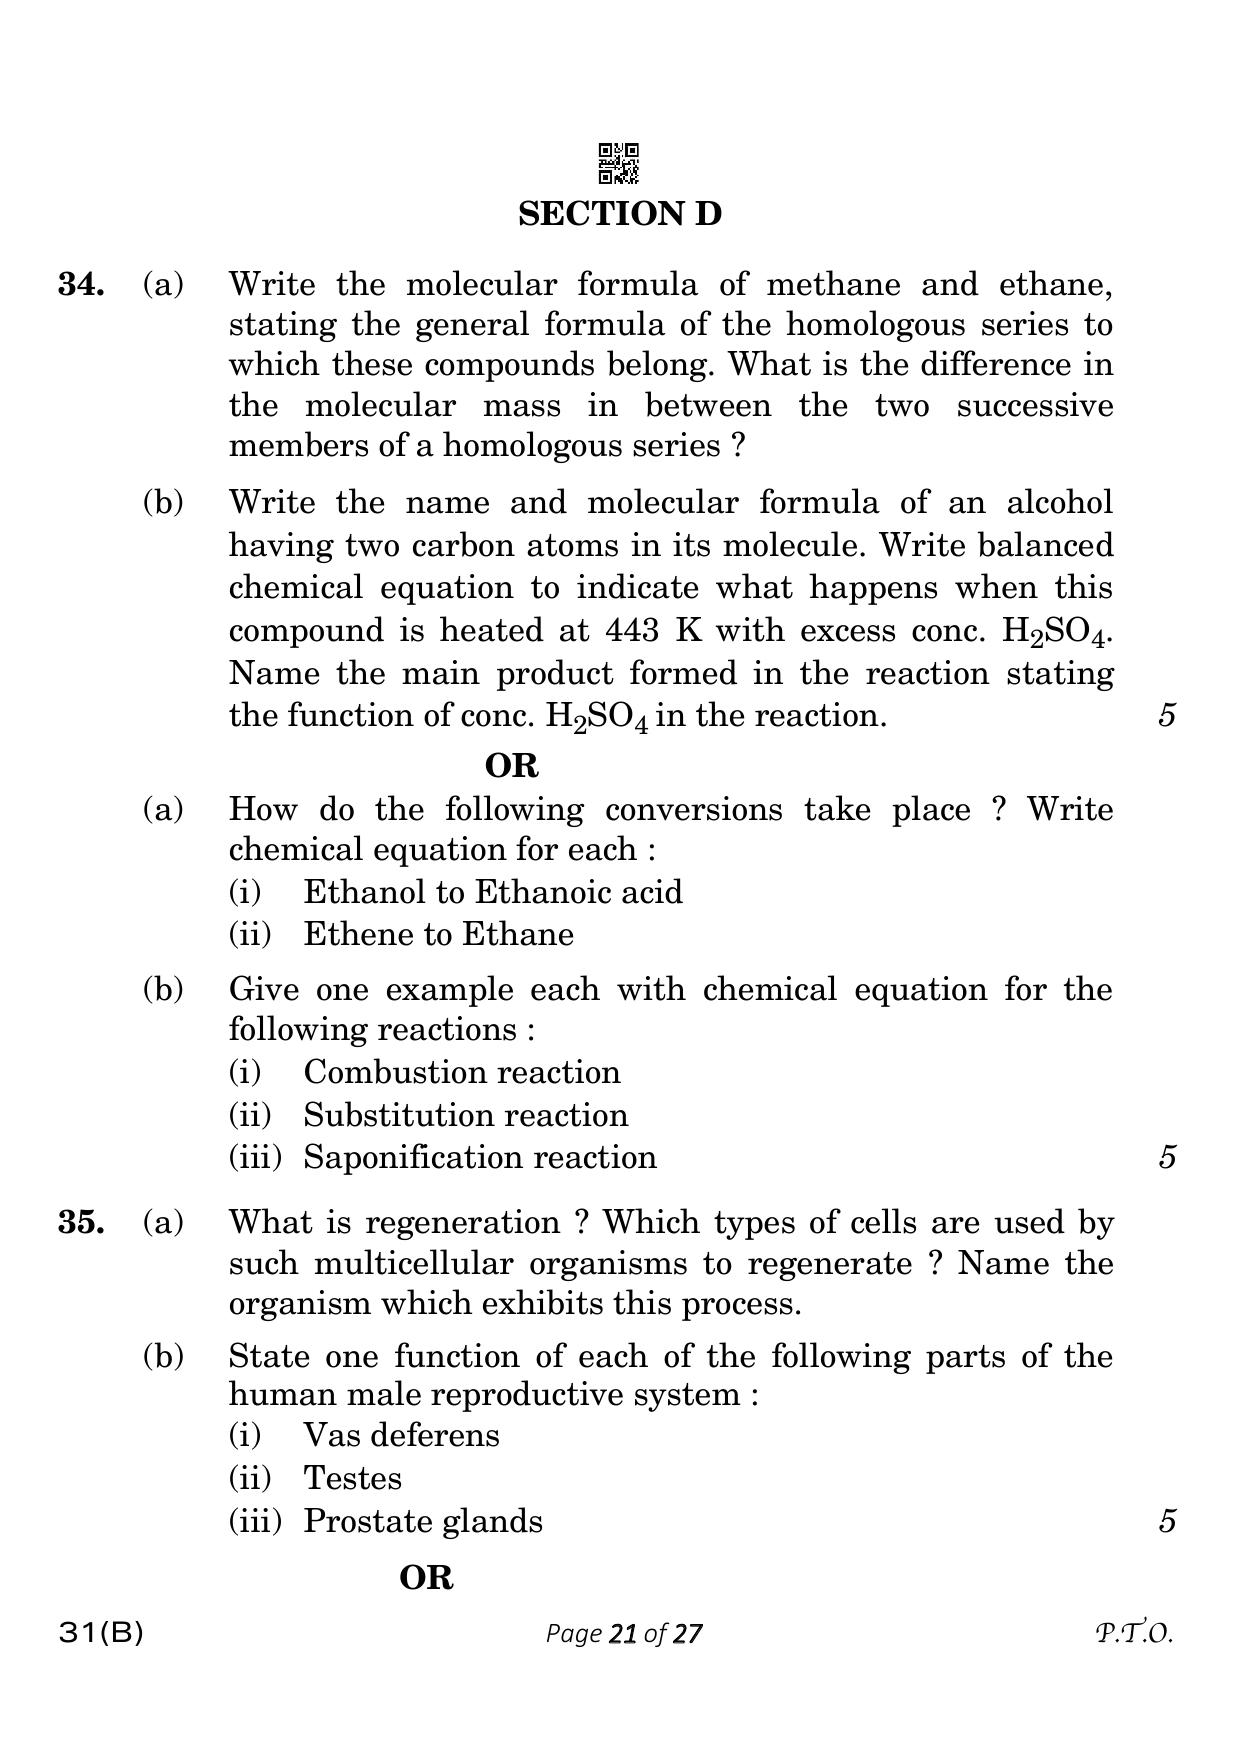 CBSE Class 10 31-B Science 2023 (Compartment) Question Paper - Page 21